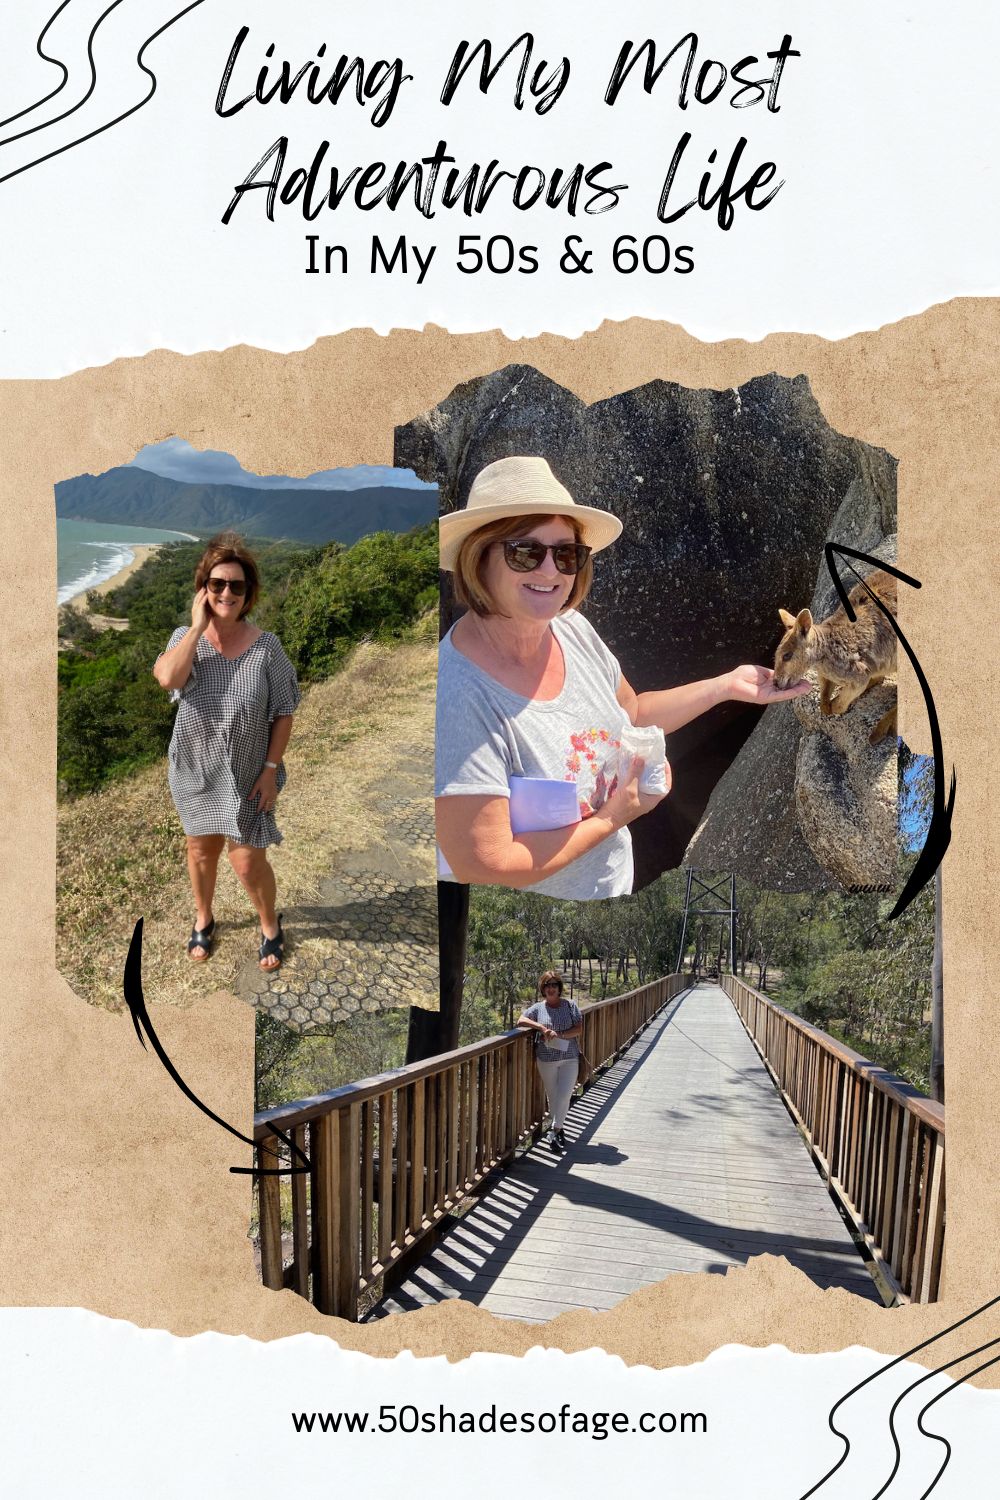 Living My Most Adventurous Life in My 50s & 60s